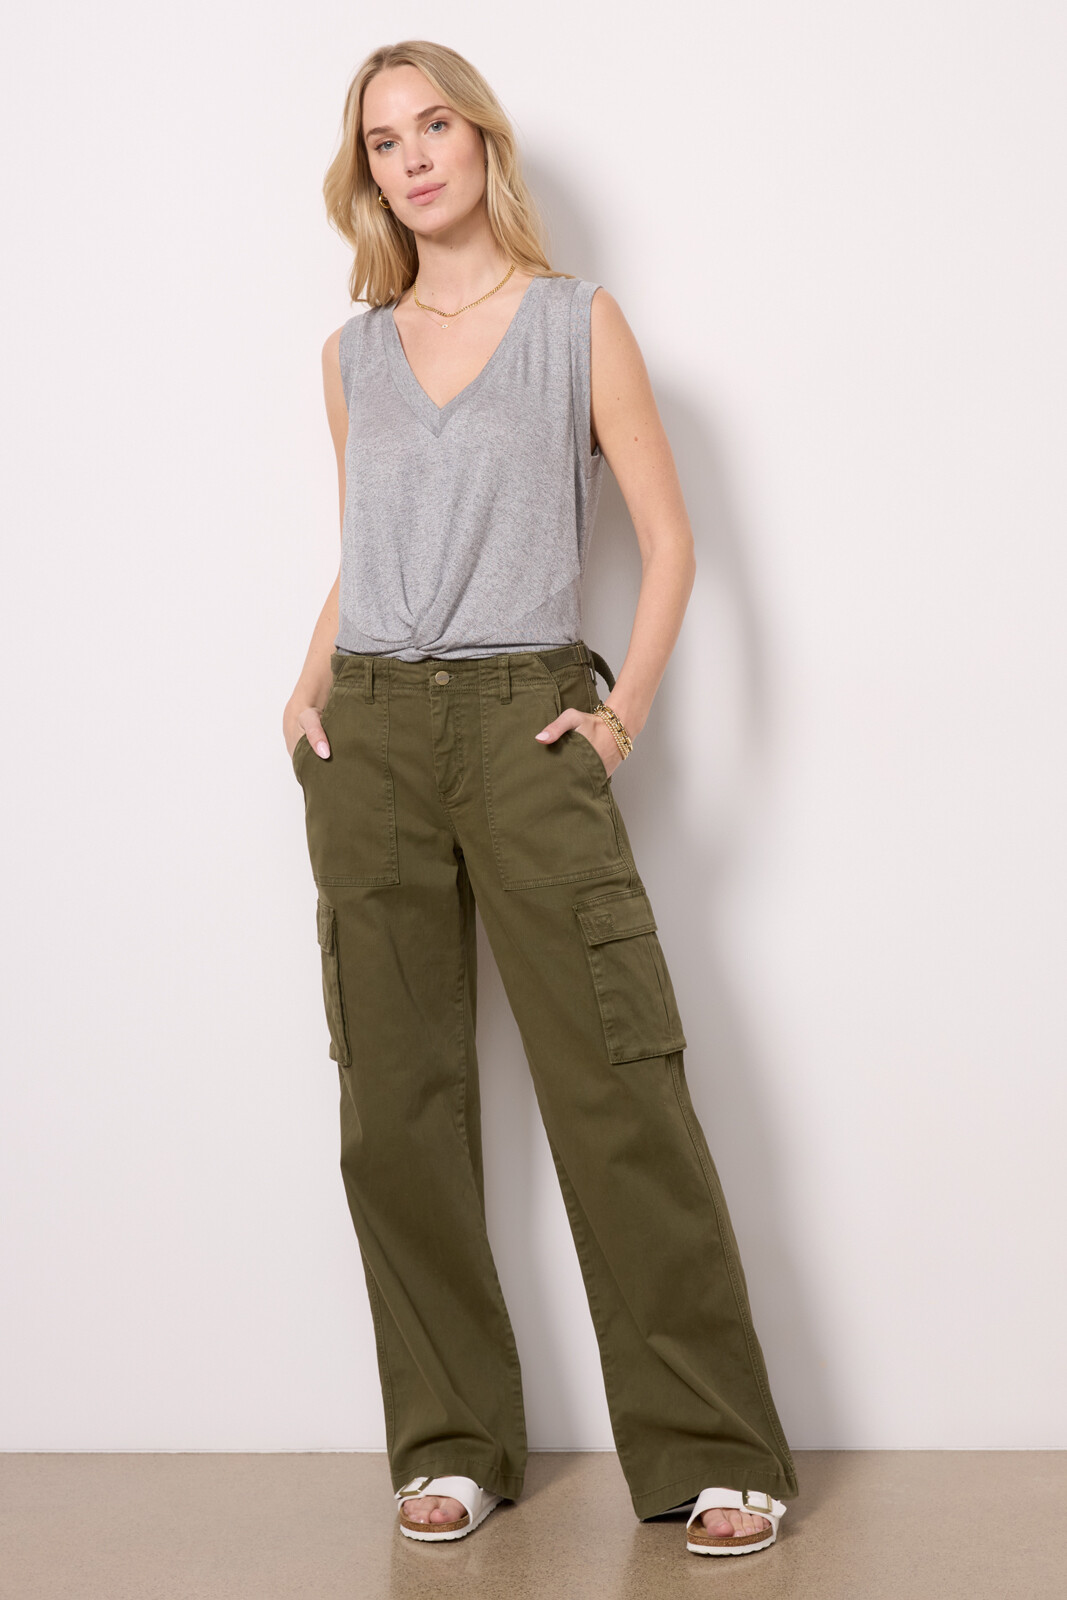 Army green cargo pants women - Buy the best army green cargo pants